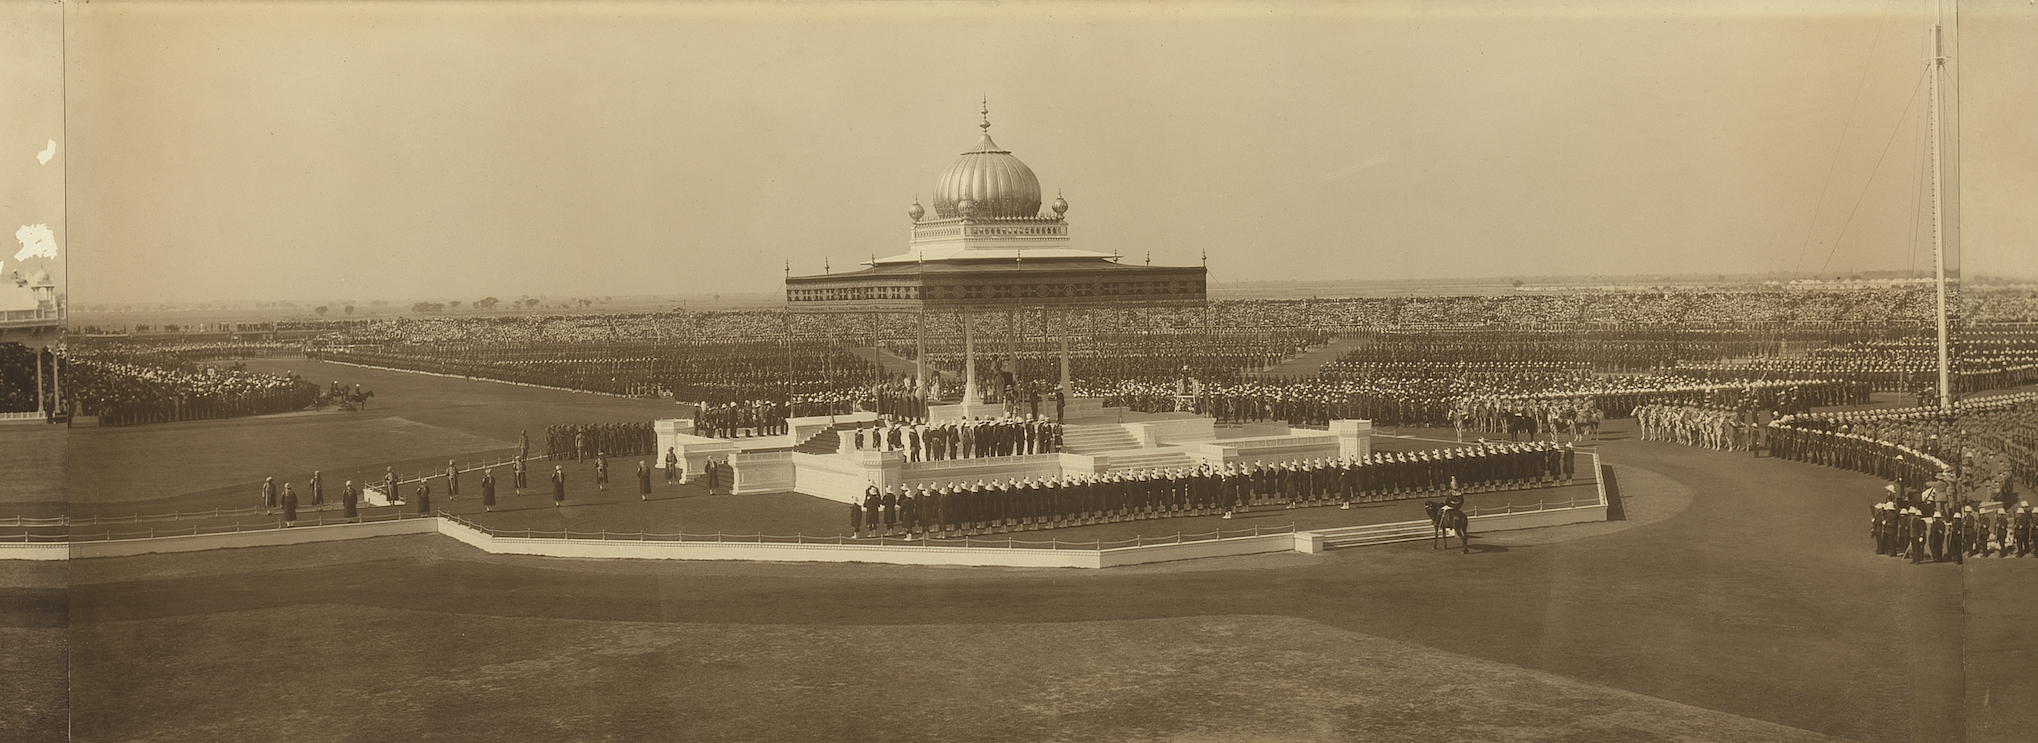 Second gelatin silver photograph framed alongside each other to form a panorama of three individual key moments taken during the Delhi Durbar of 1911. Each photograph features King George V and Queen Mary.